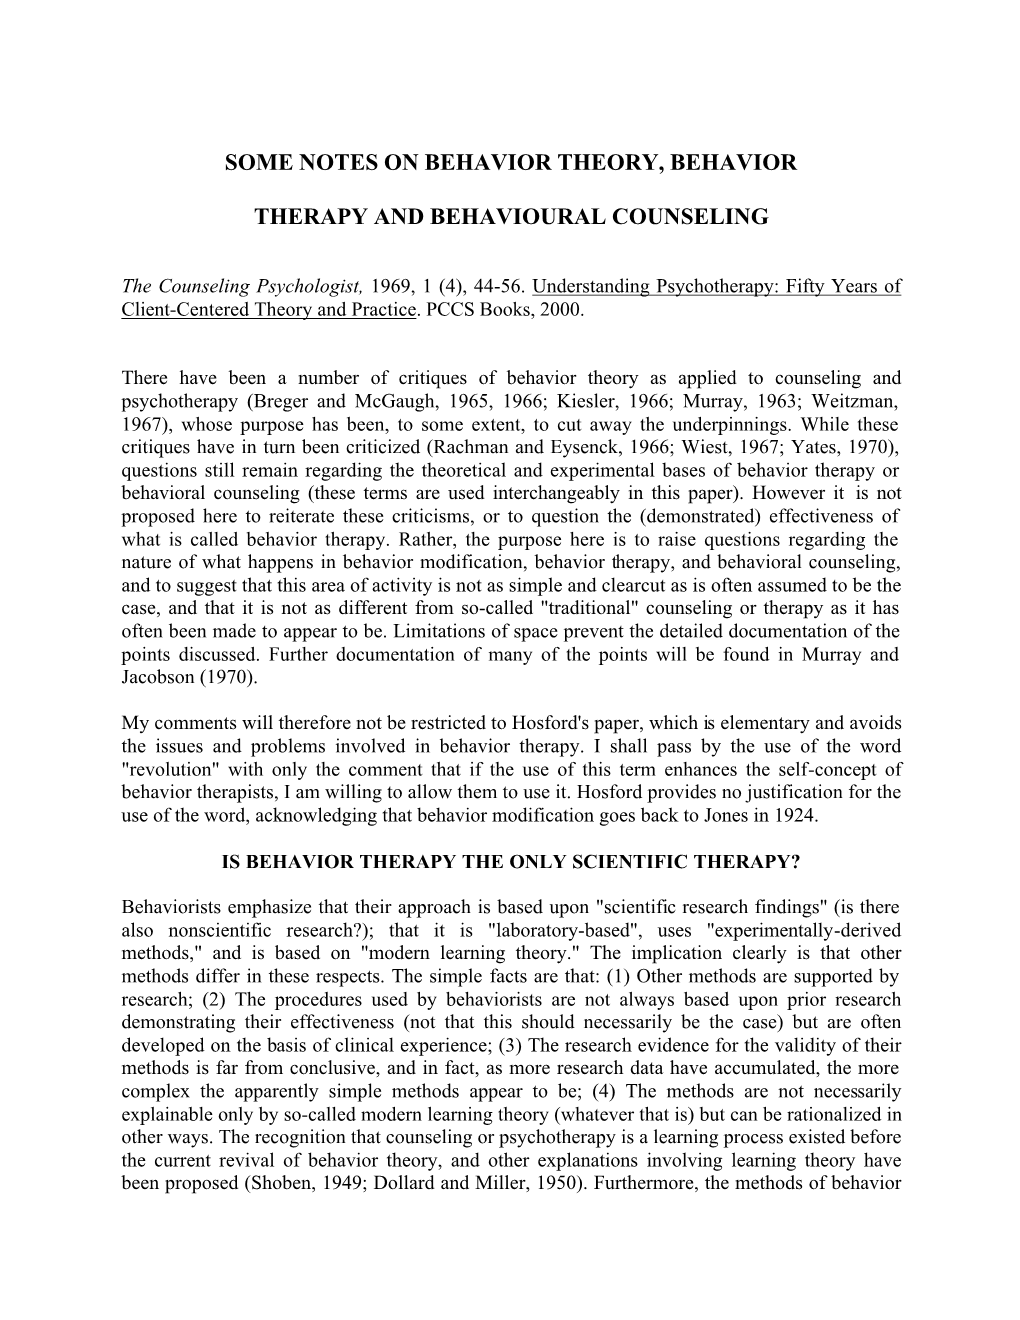 Some Notes on Behavior Theory, Behavior Therapy and Behavioural